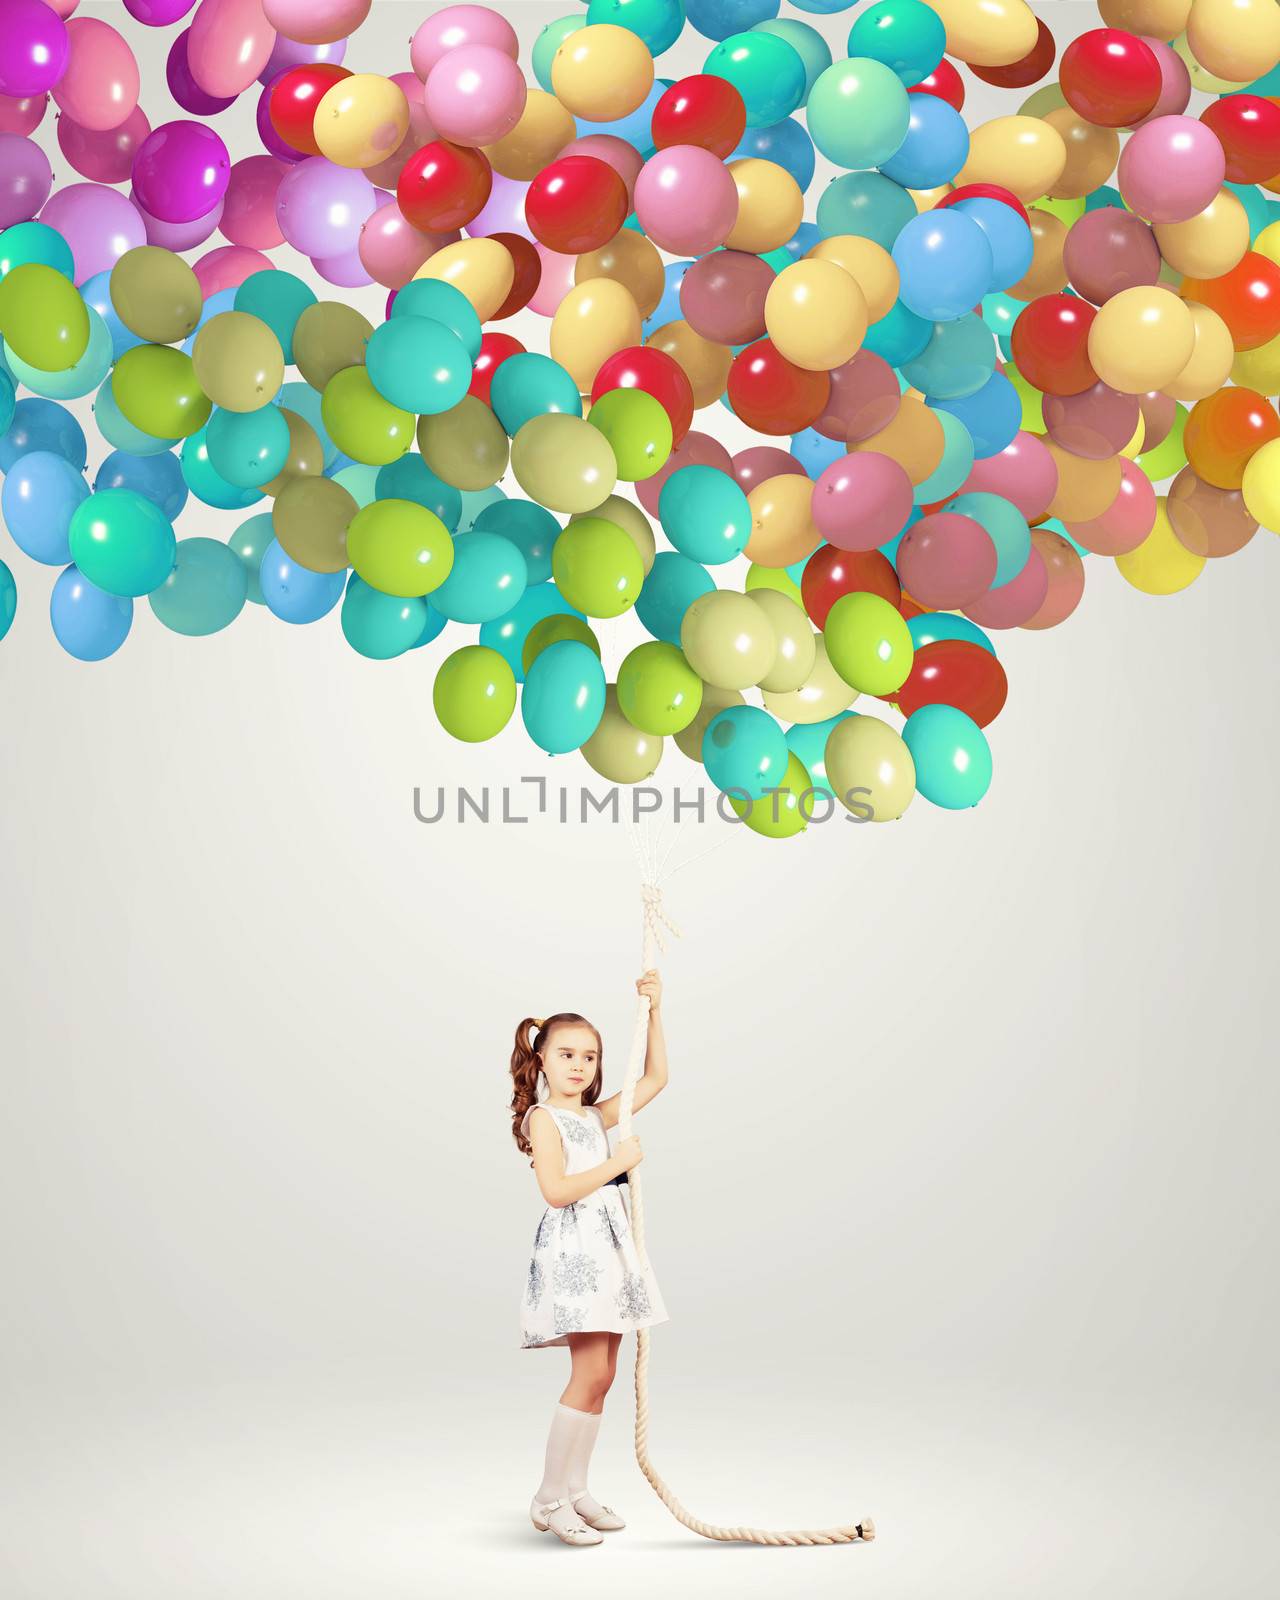 Little girl holding balloons by sergey_nivens